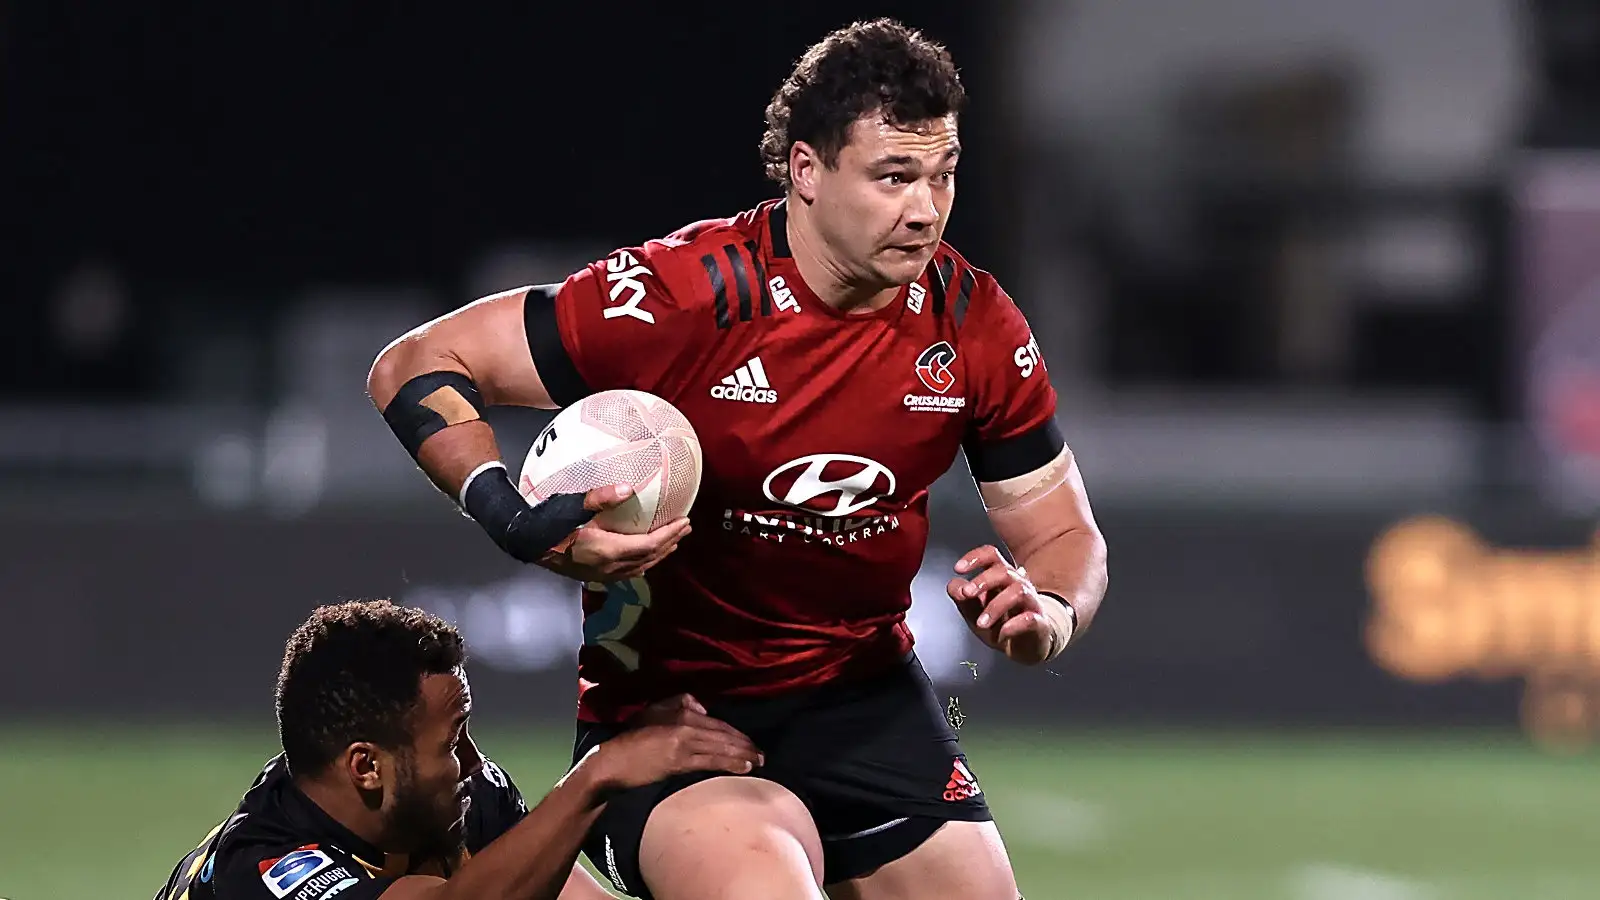 Super Rugby Pacific Team Tracker: All Blacks star’s injury adds to Crusaders crisis ahead of Chiefs clash